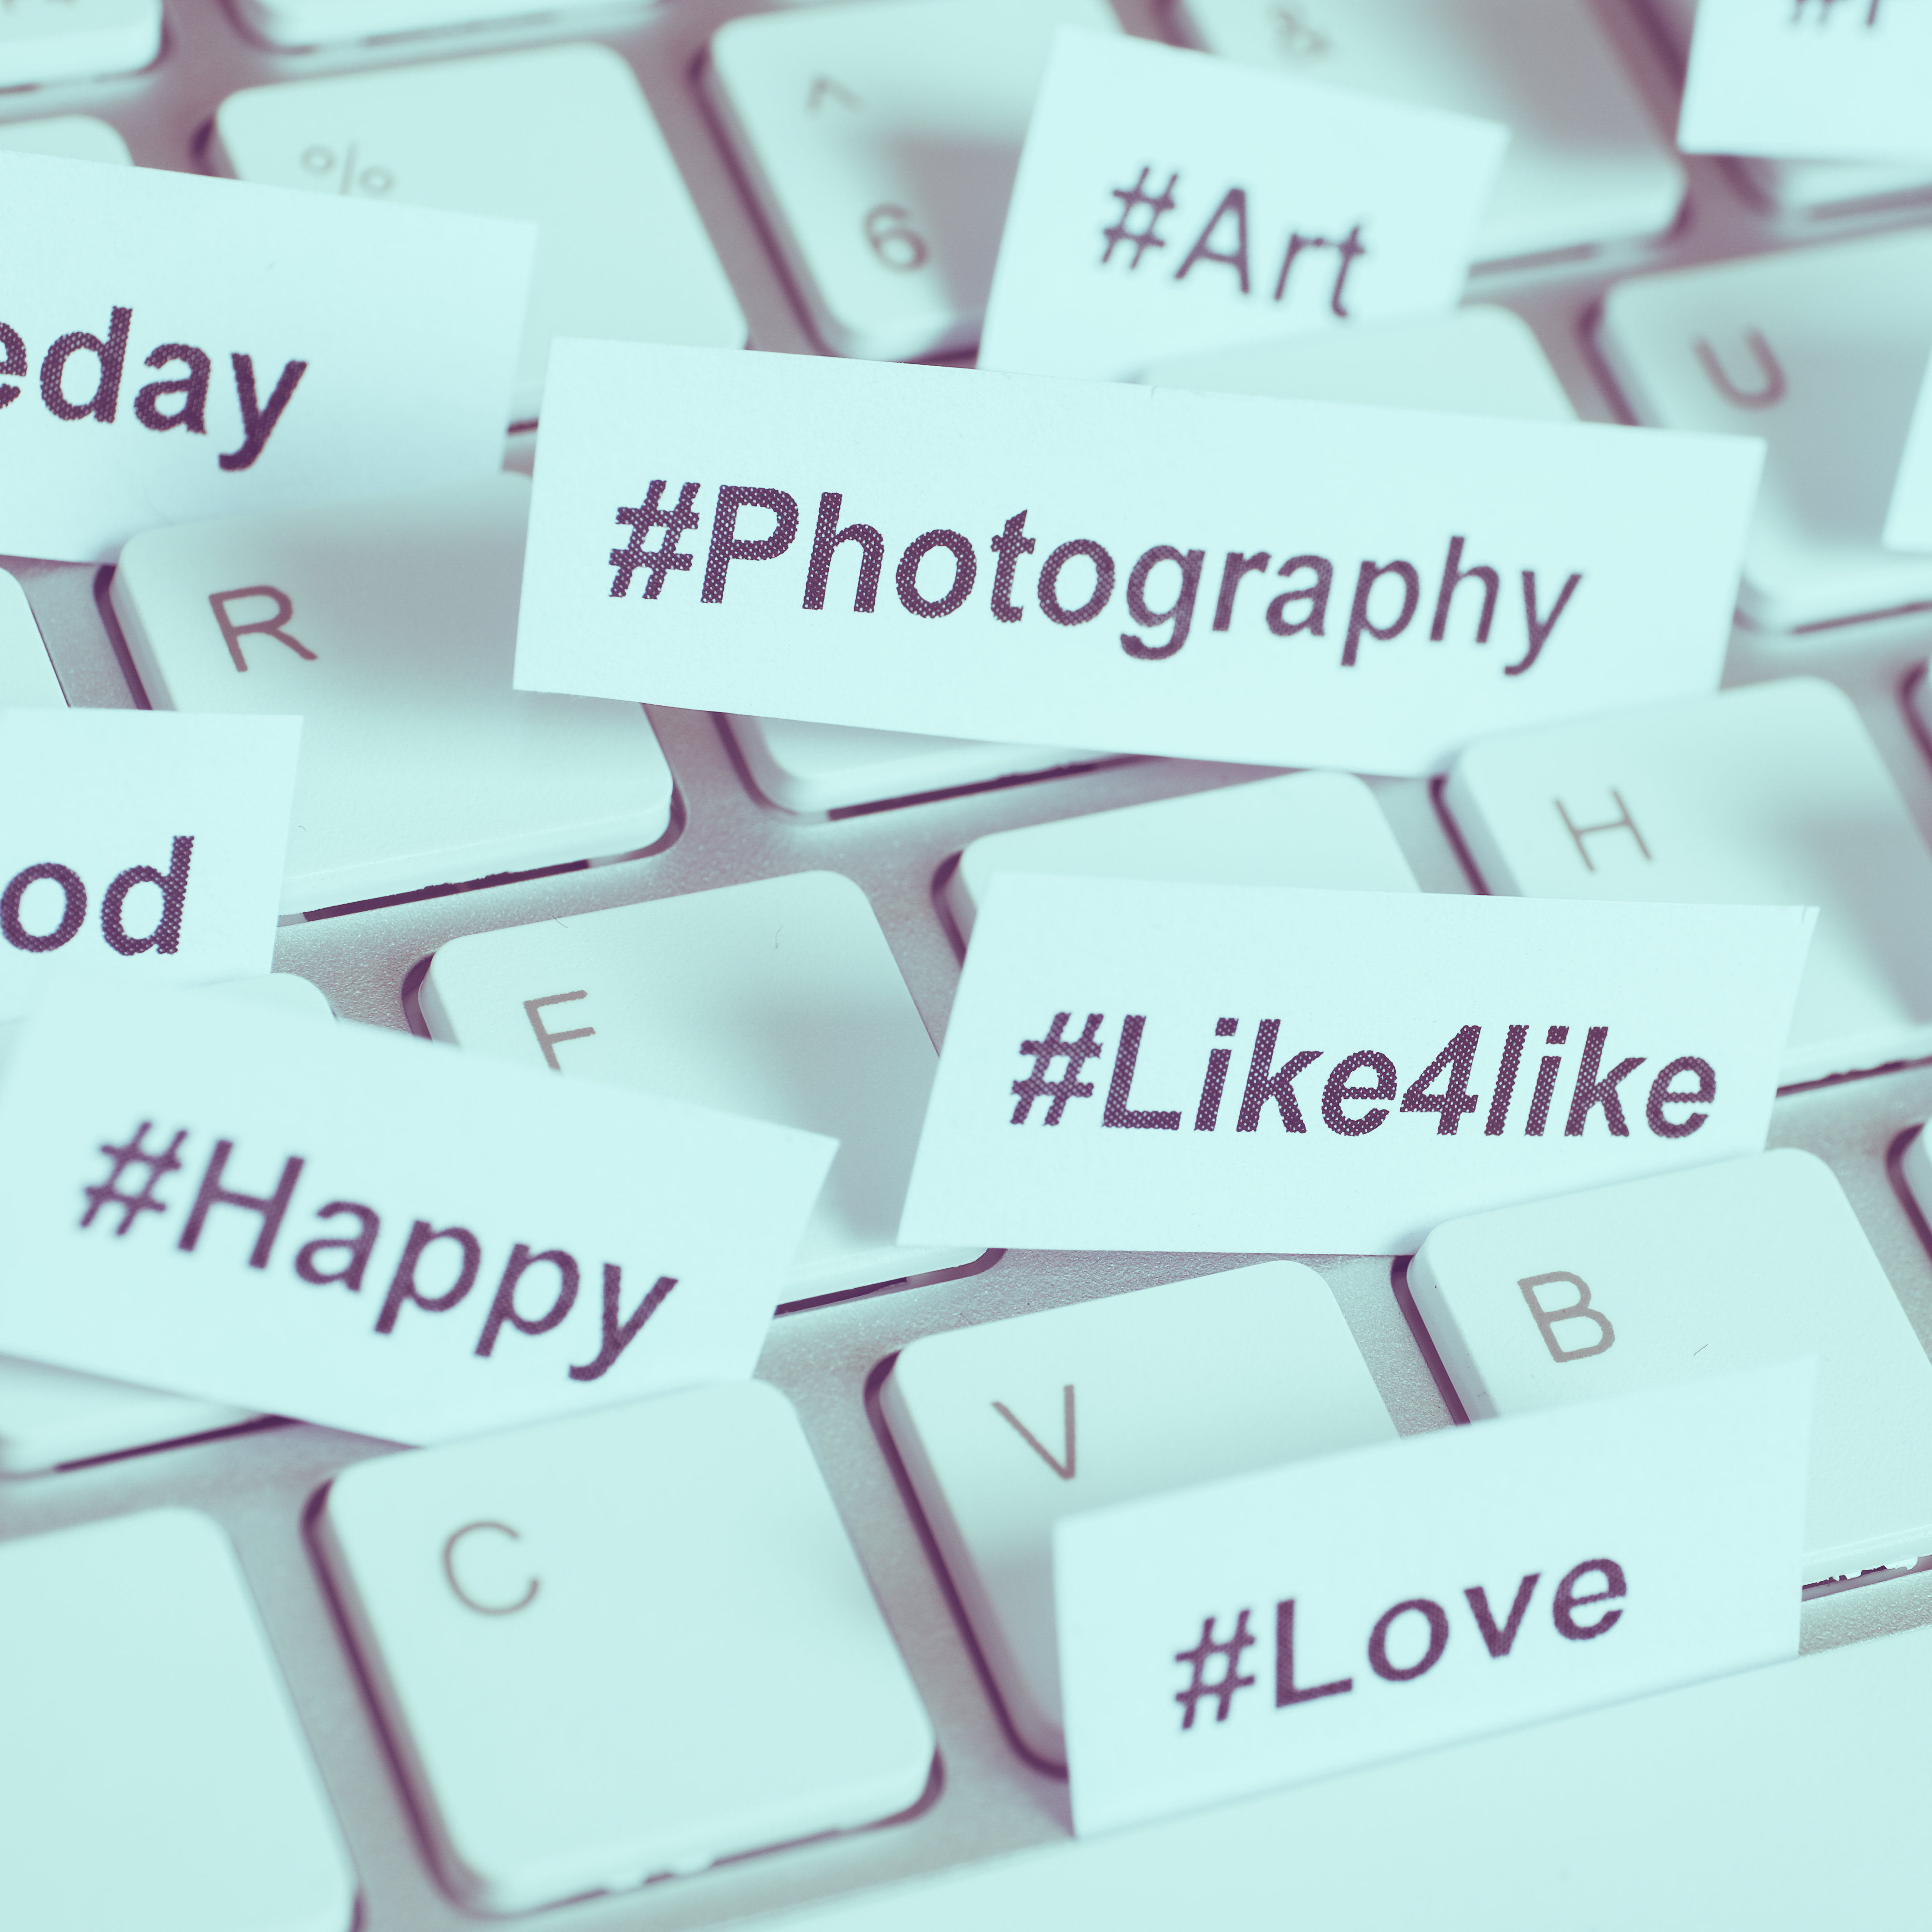 Hashtag research is great for your social media marketing.